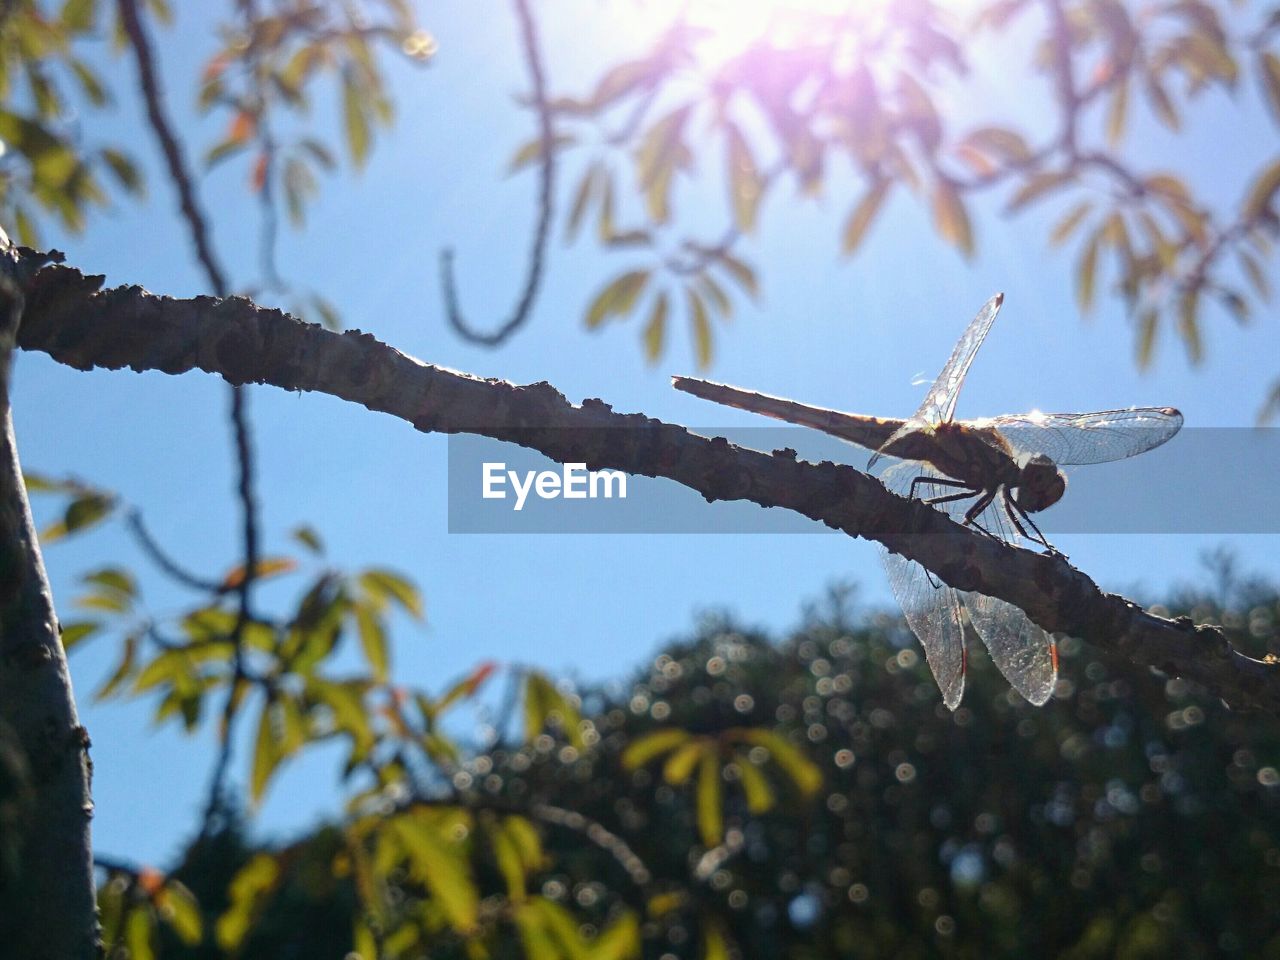 Close-up of dragonfly on twig against sky on sunny day